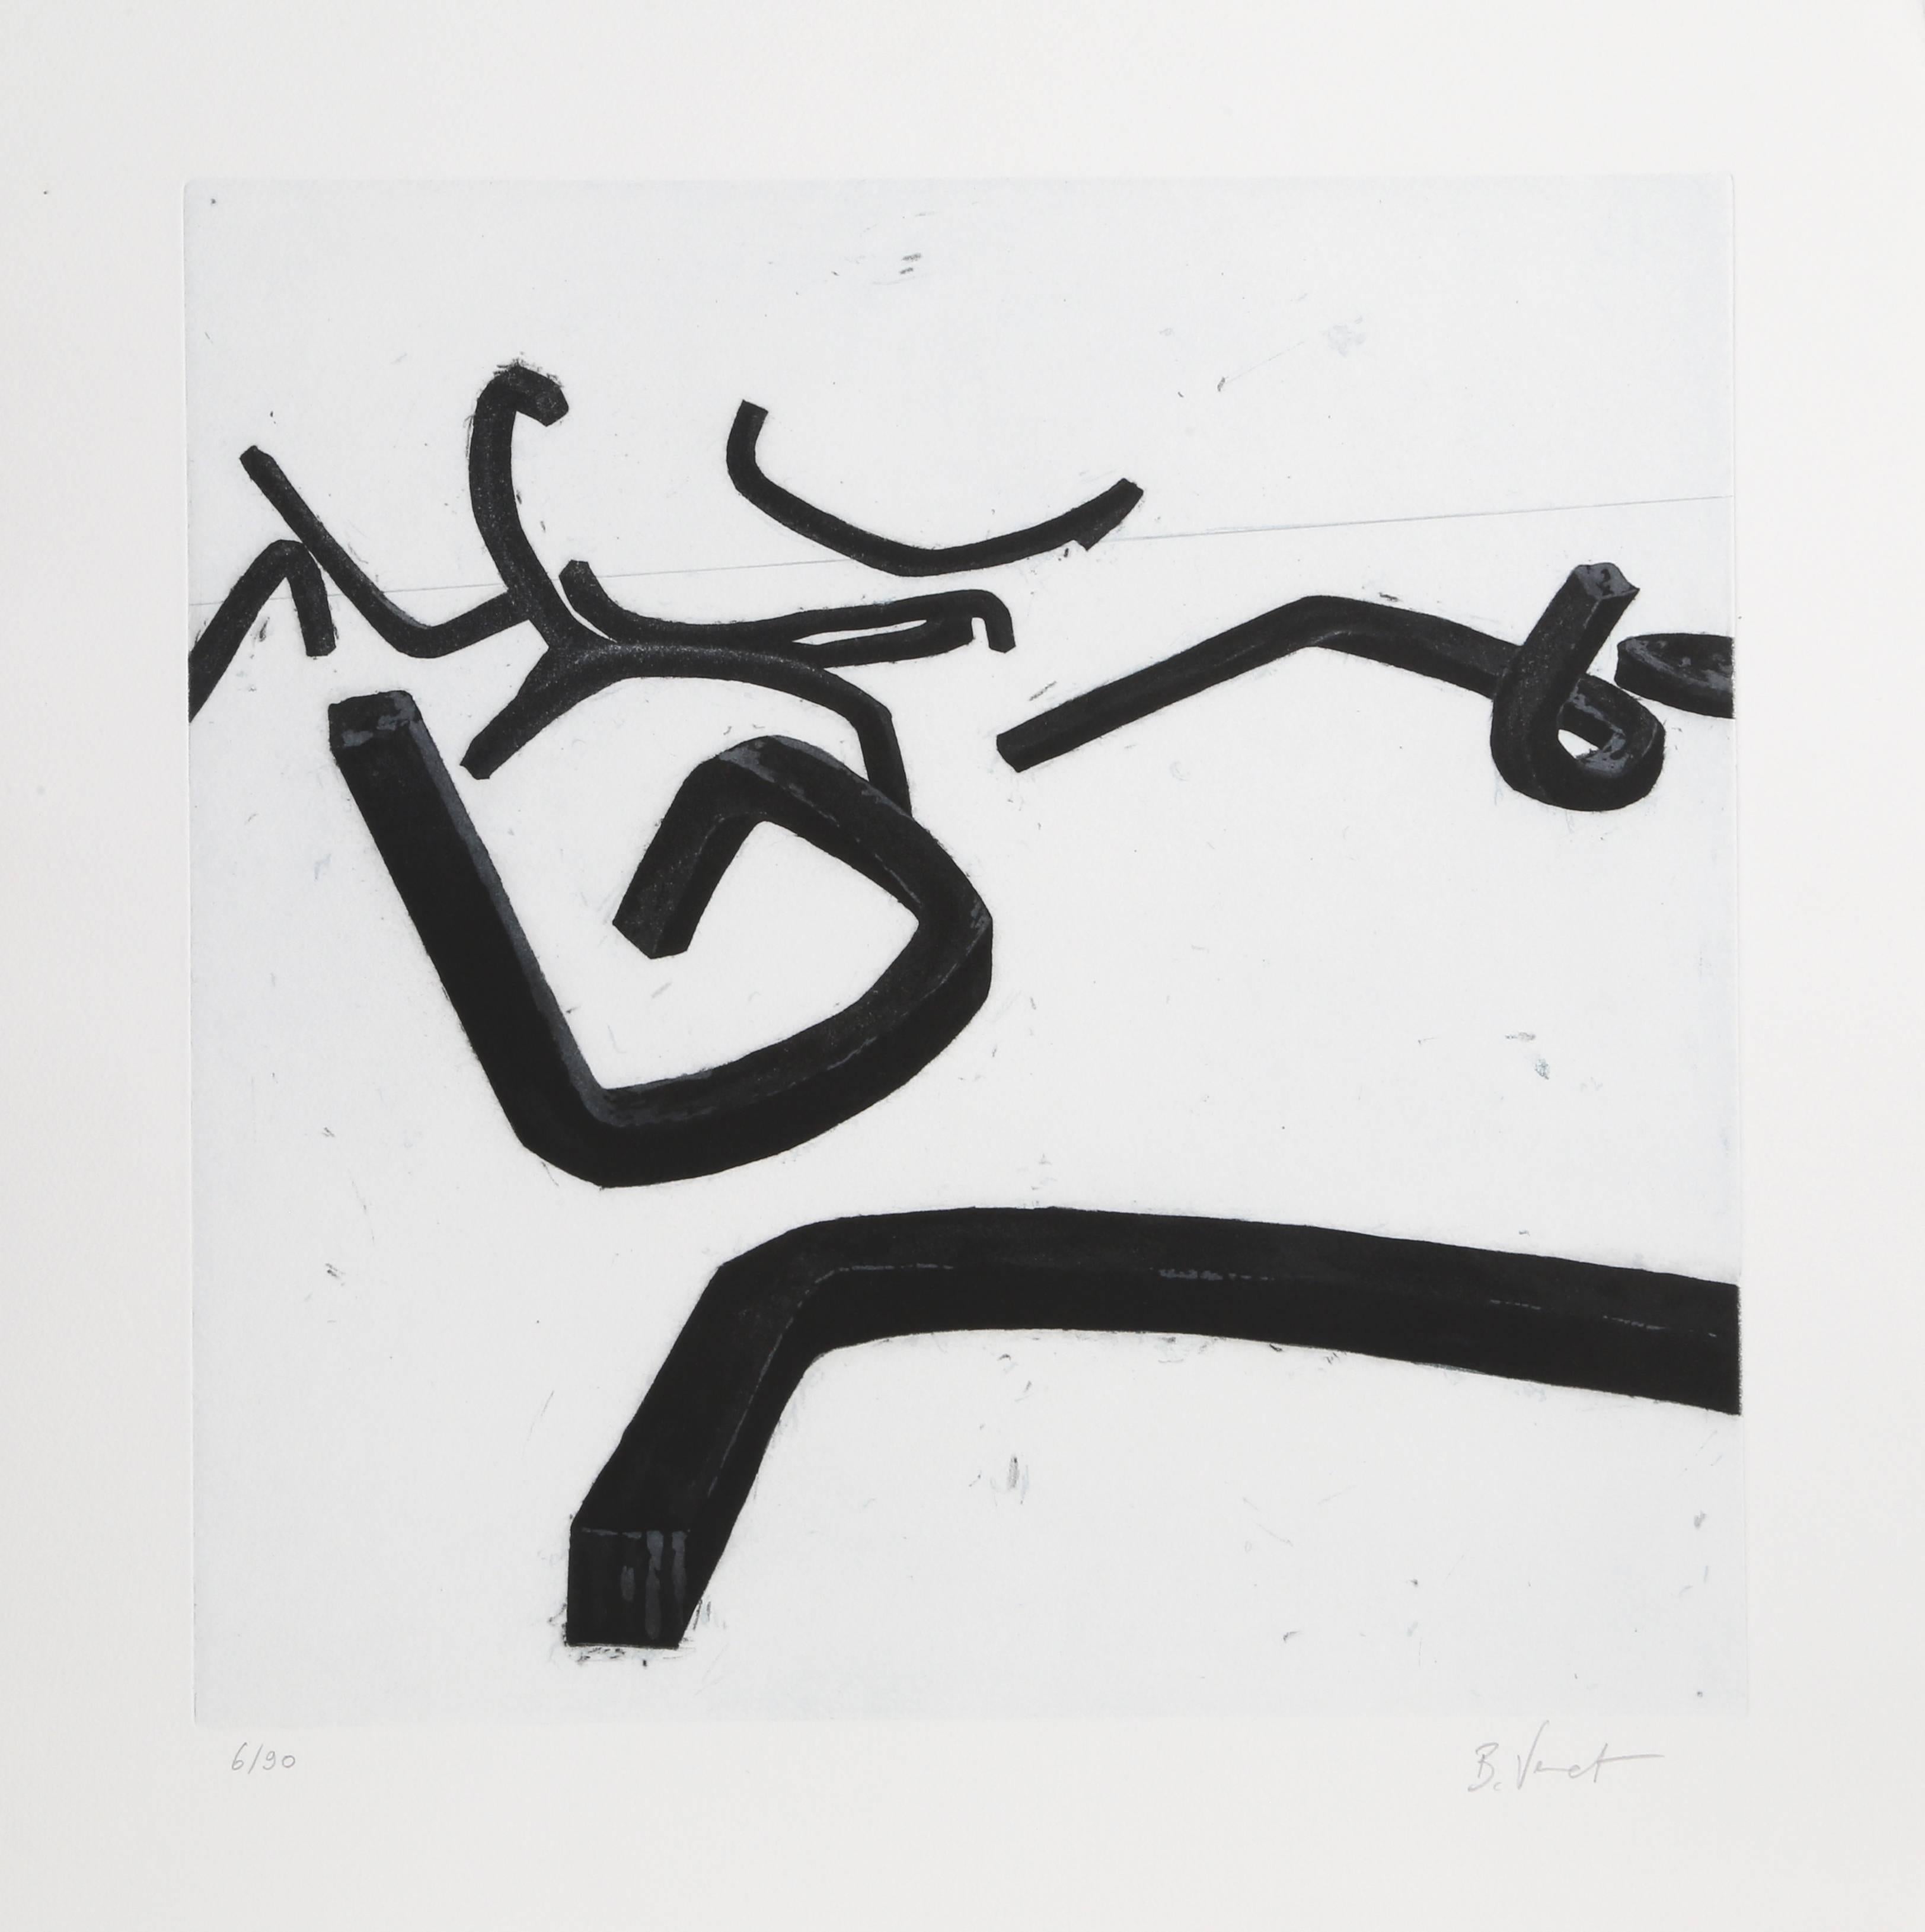 This etching comes from the portfolio "Combinaison Aleatoire de Lignes Indeterminees" by French sculptor and artist Bernar Venet. Throughout his career, Venet moved from action painting into a more logical, mathematical style influenced by